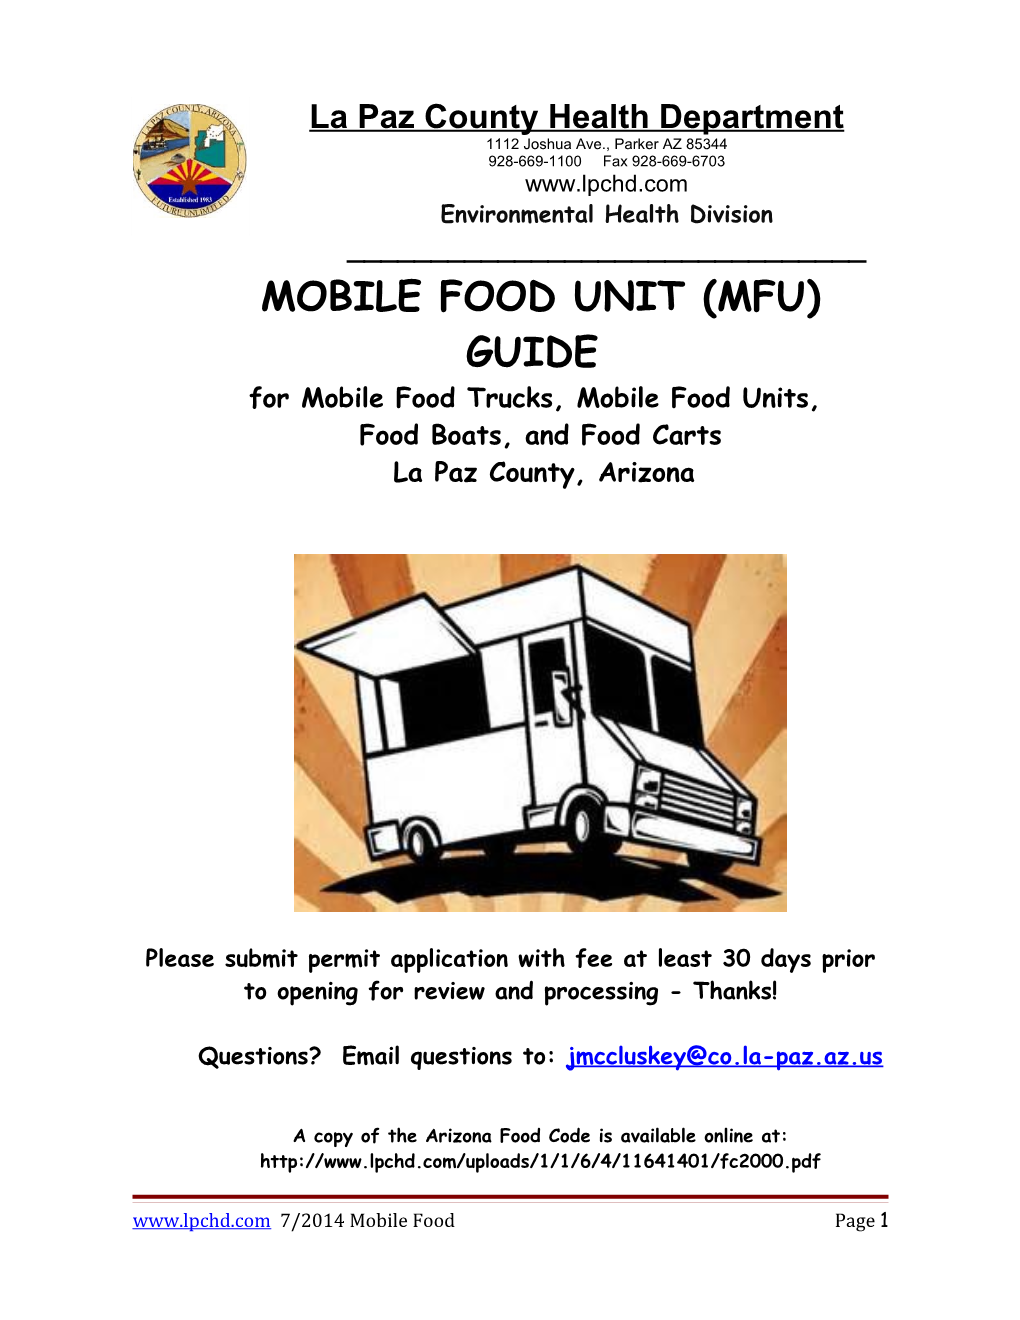 Mobile Food Unit Guidelines